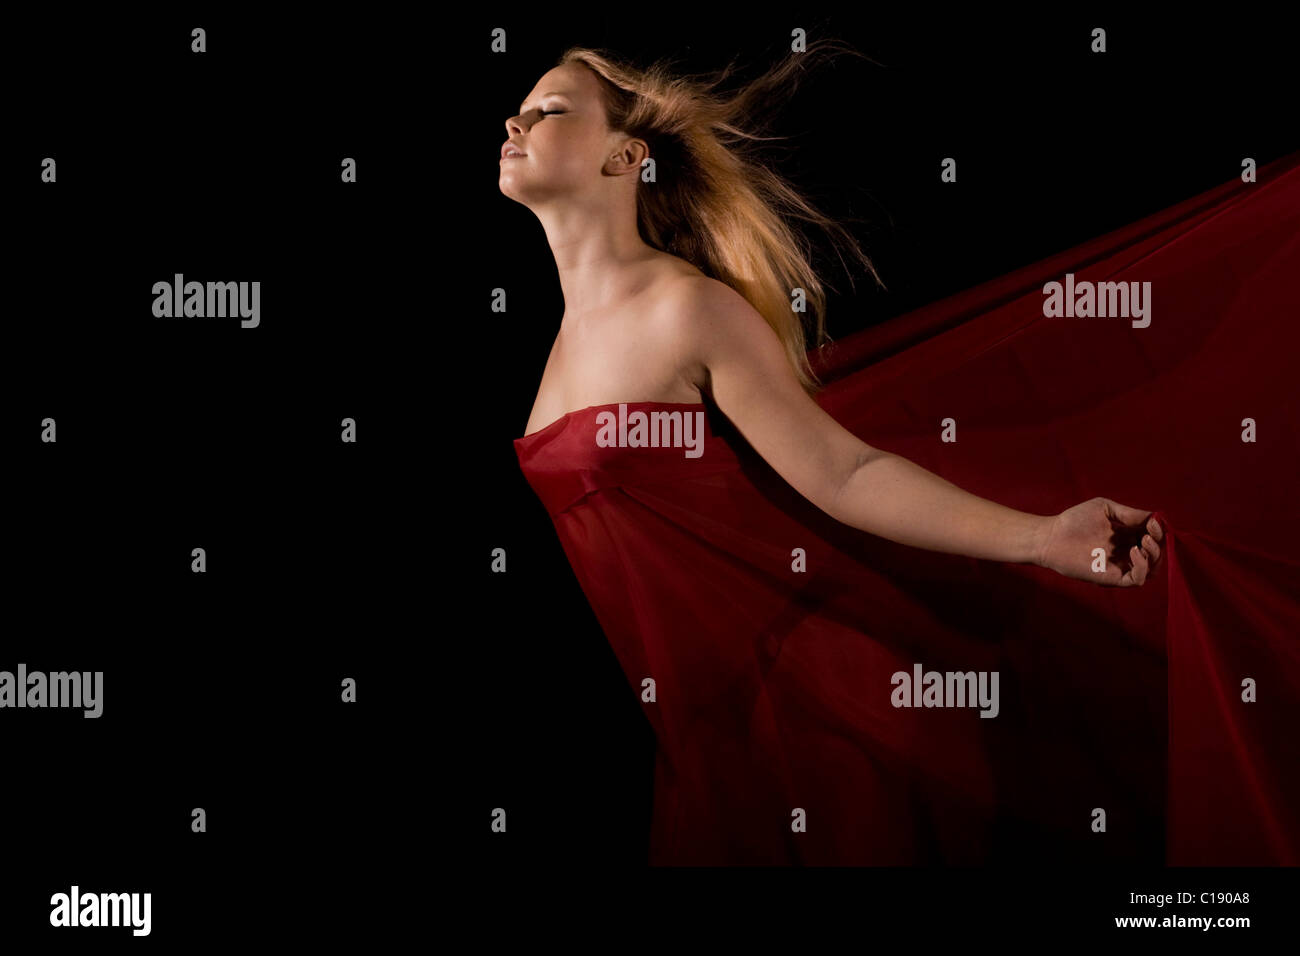 Young blonde woman wrapped in red cloth in front of a black backdrop Stock Photo